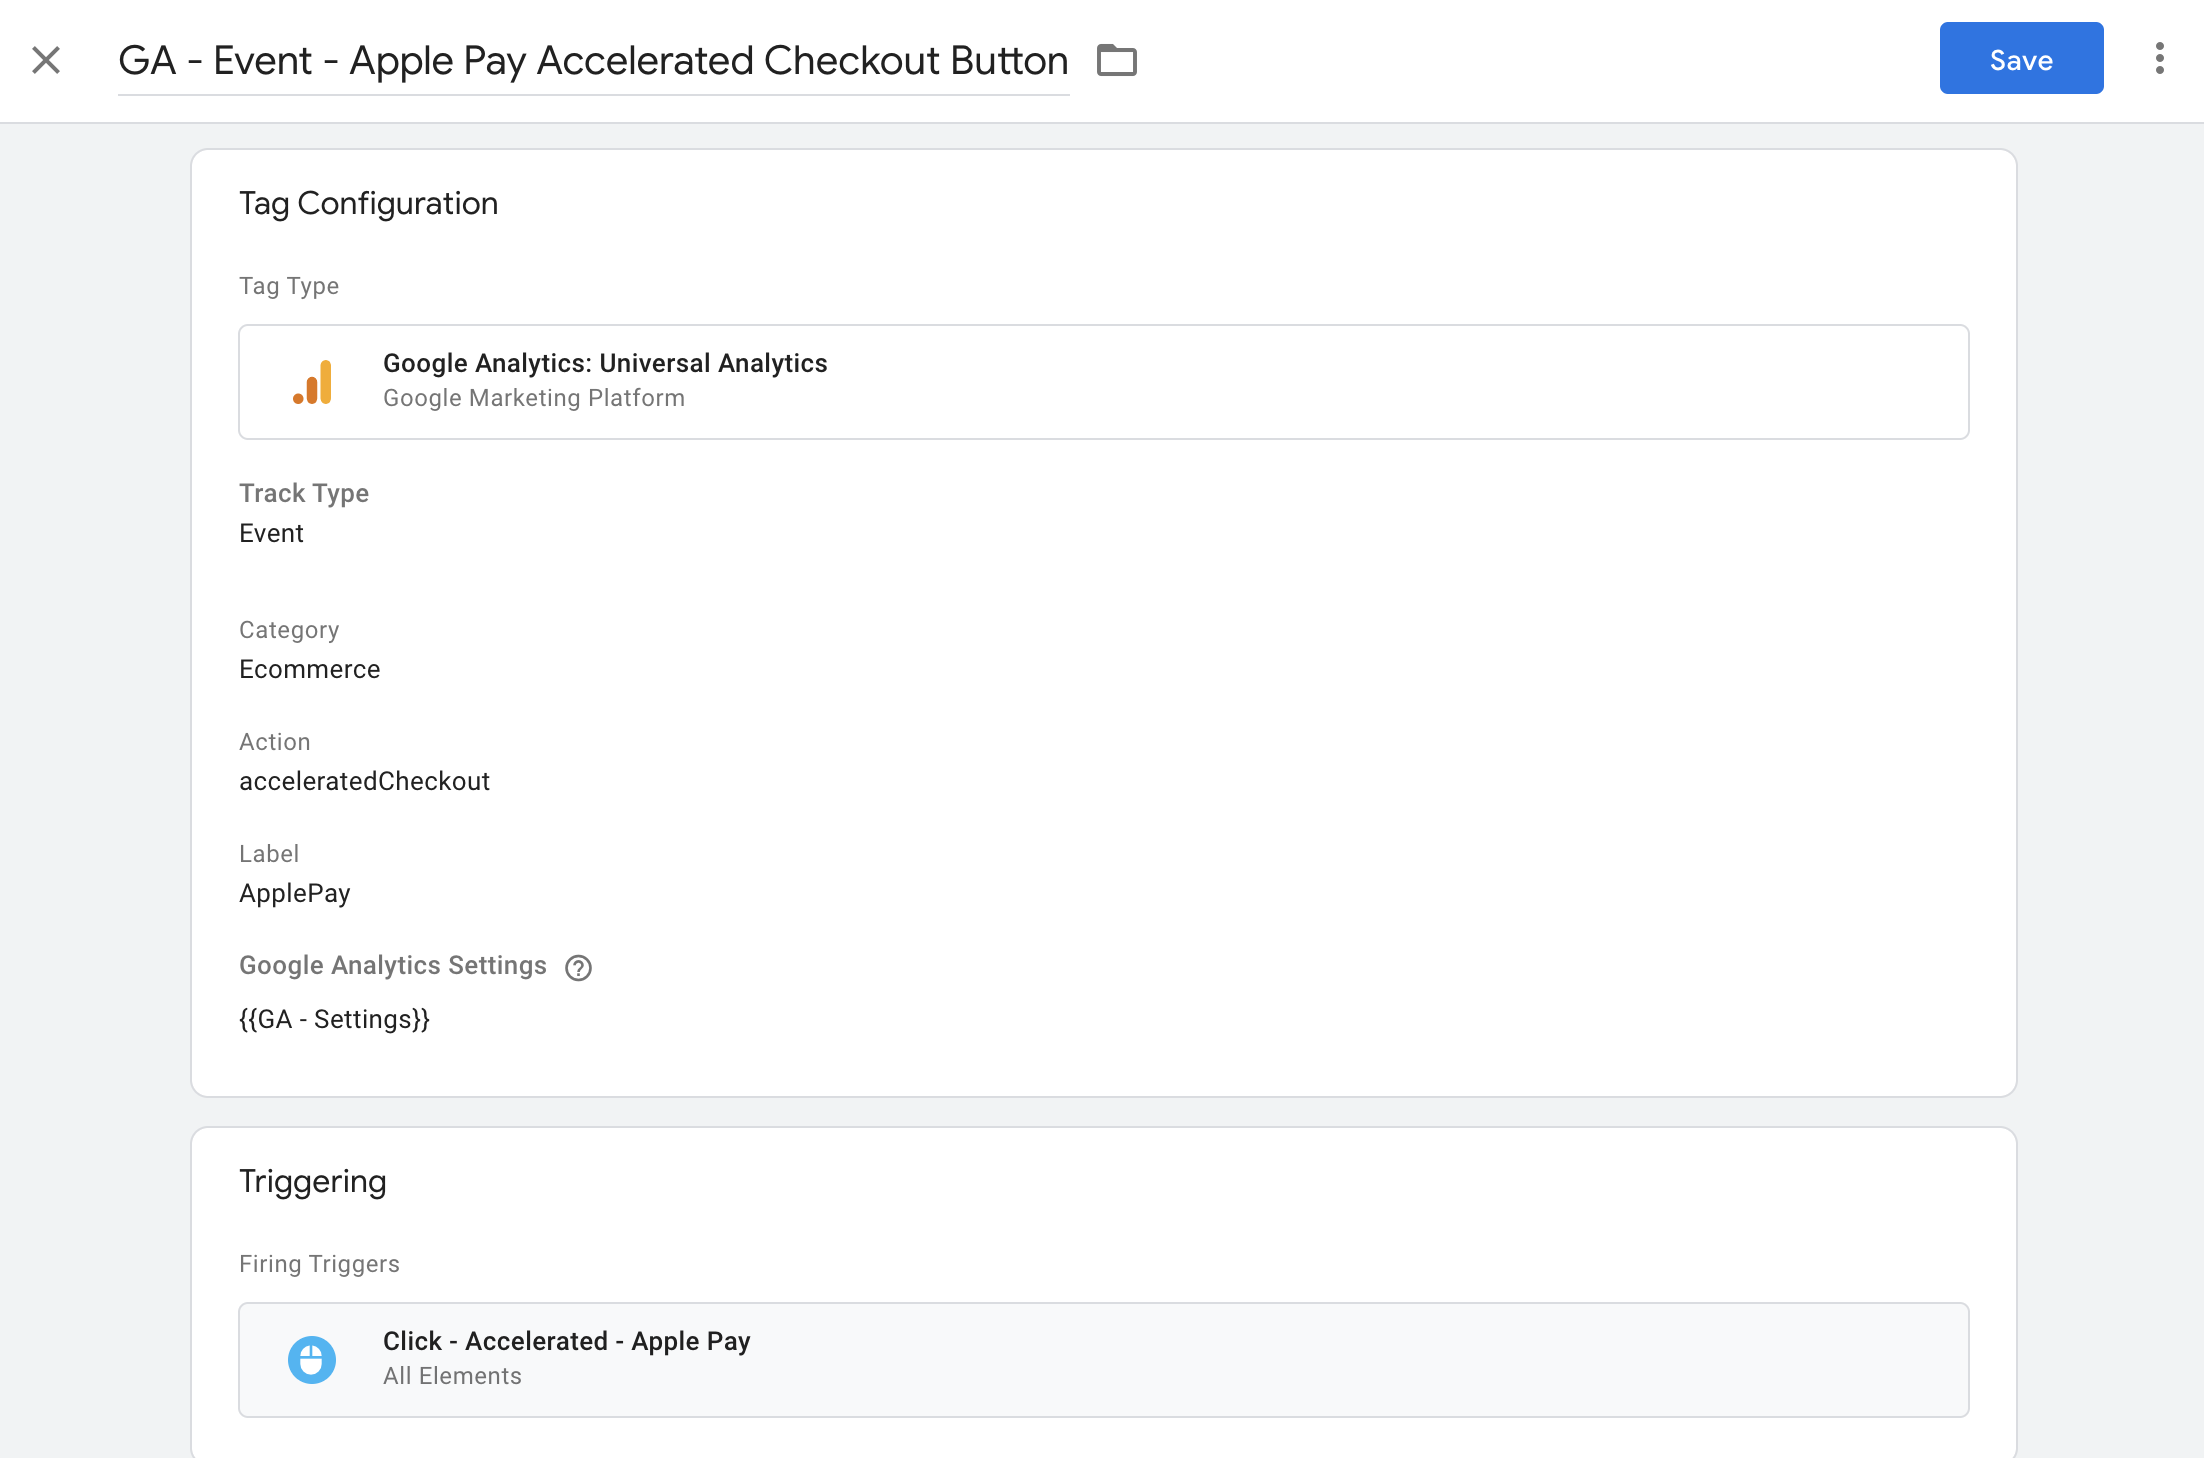 example of how to set up event tracking tags for accelerated checkout